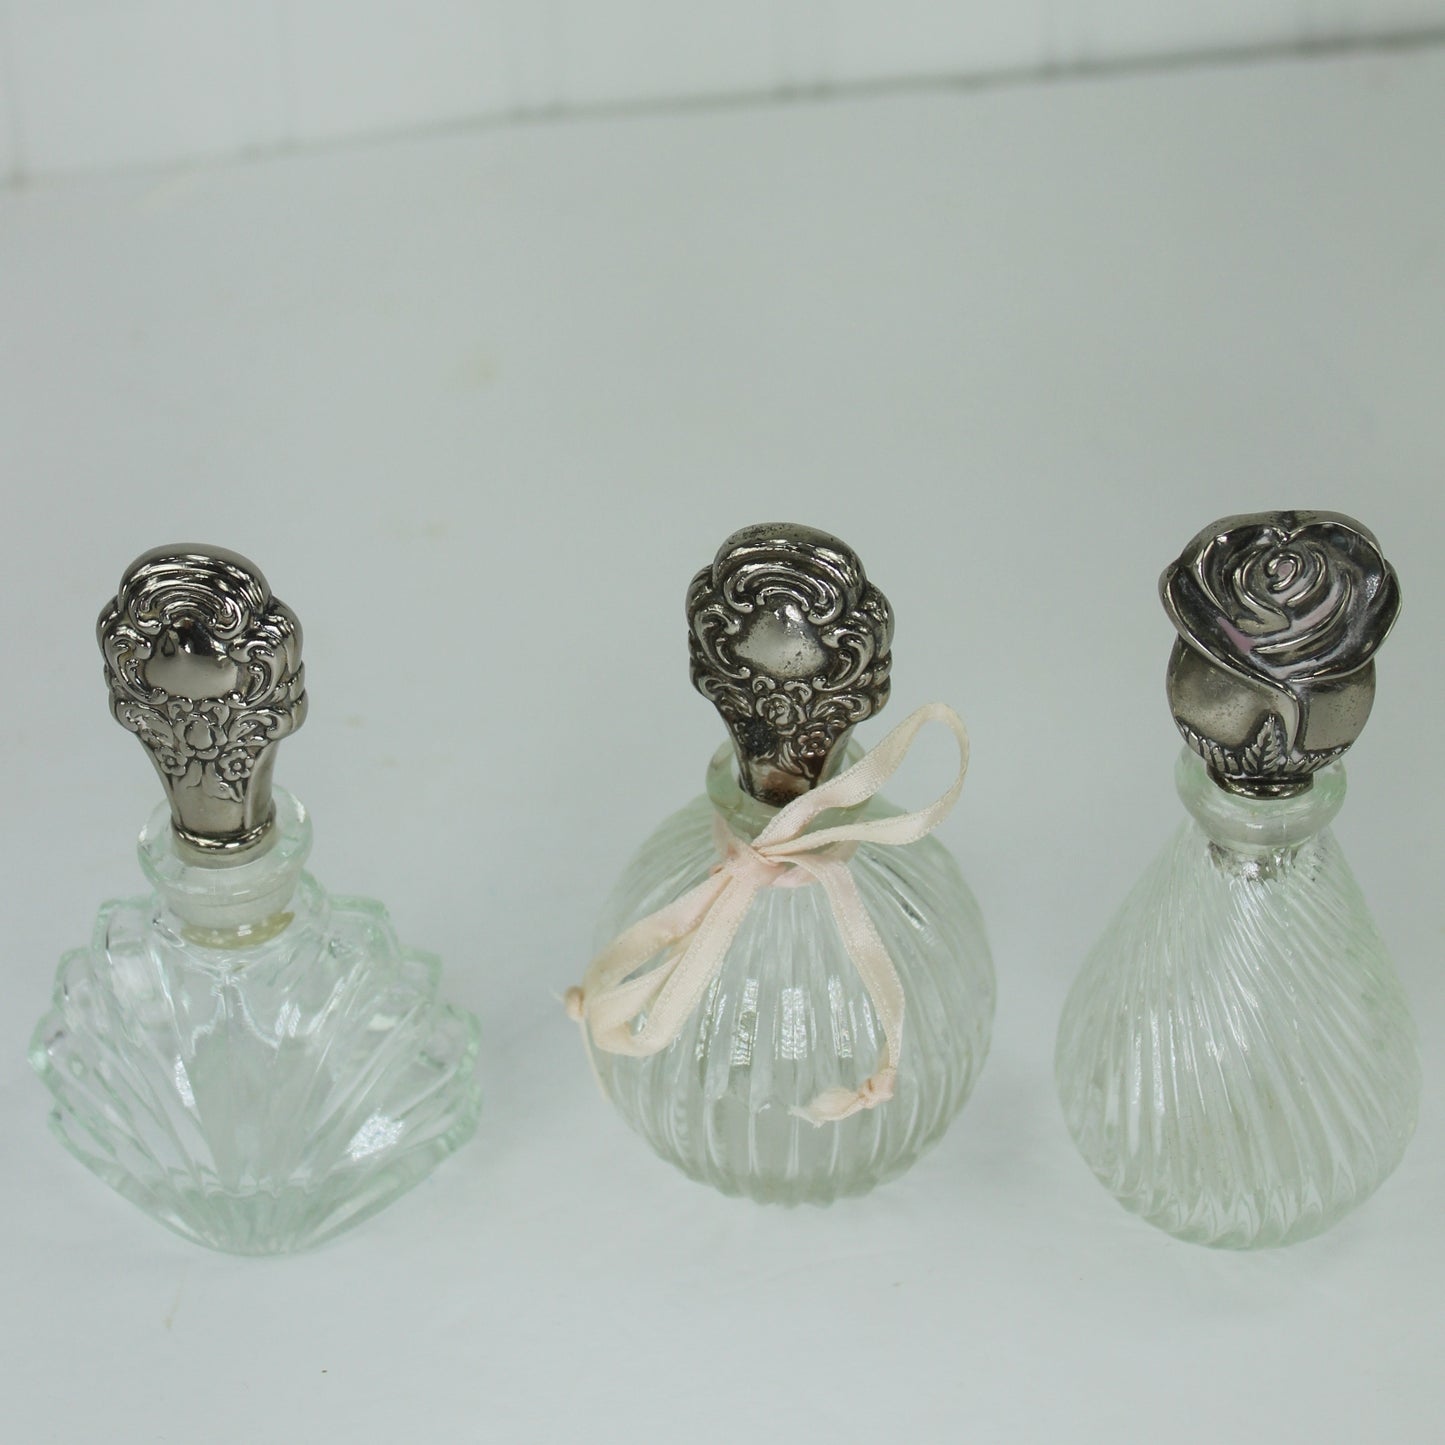 Three Vintage Vanity Scent Bottles Silver Dauber Roses Floral Tops silver quality unmarked